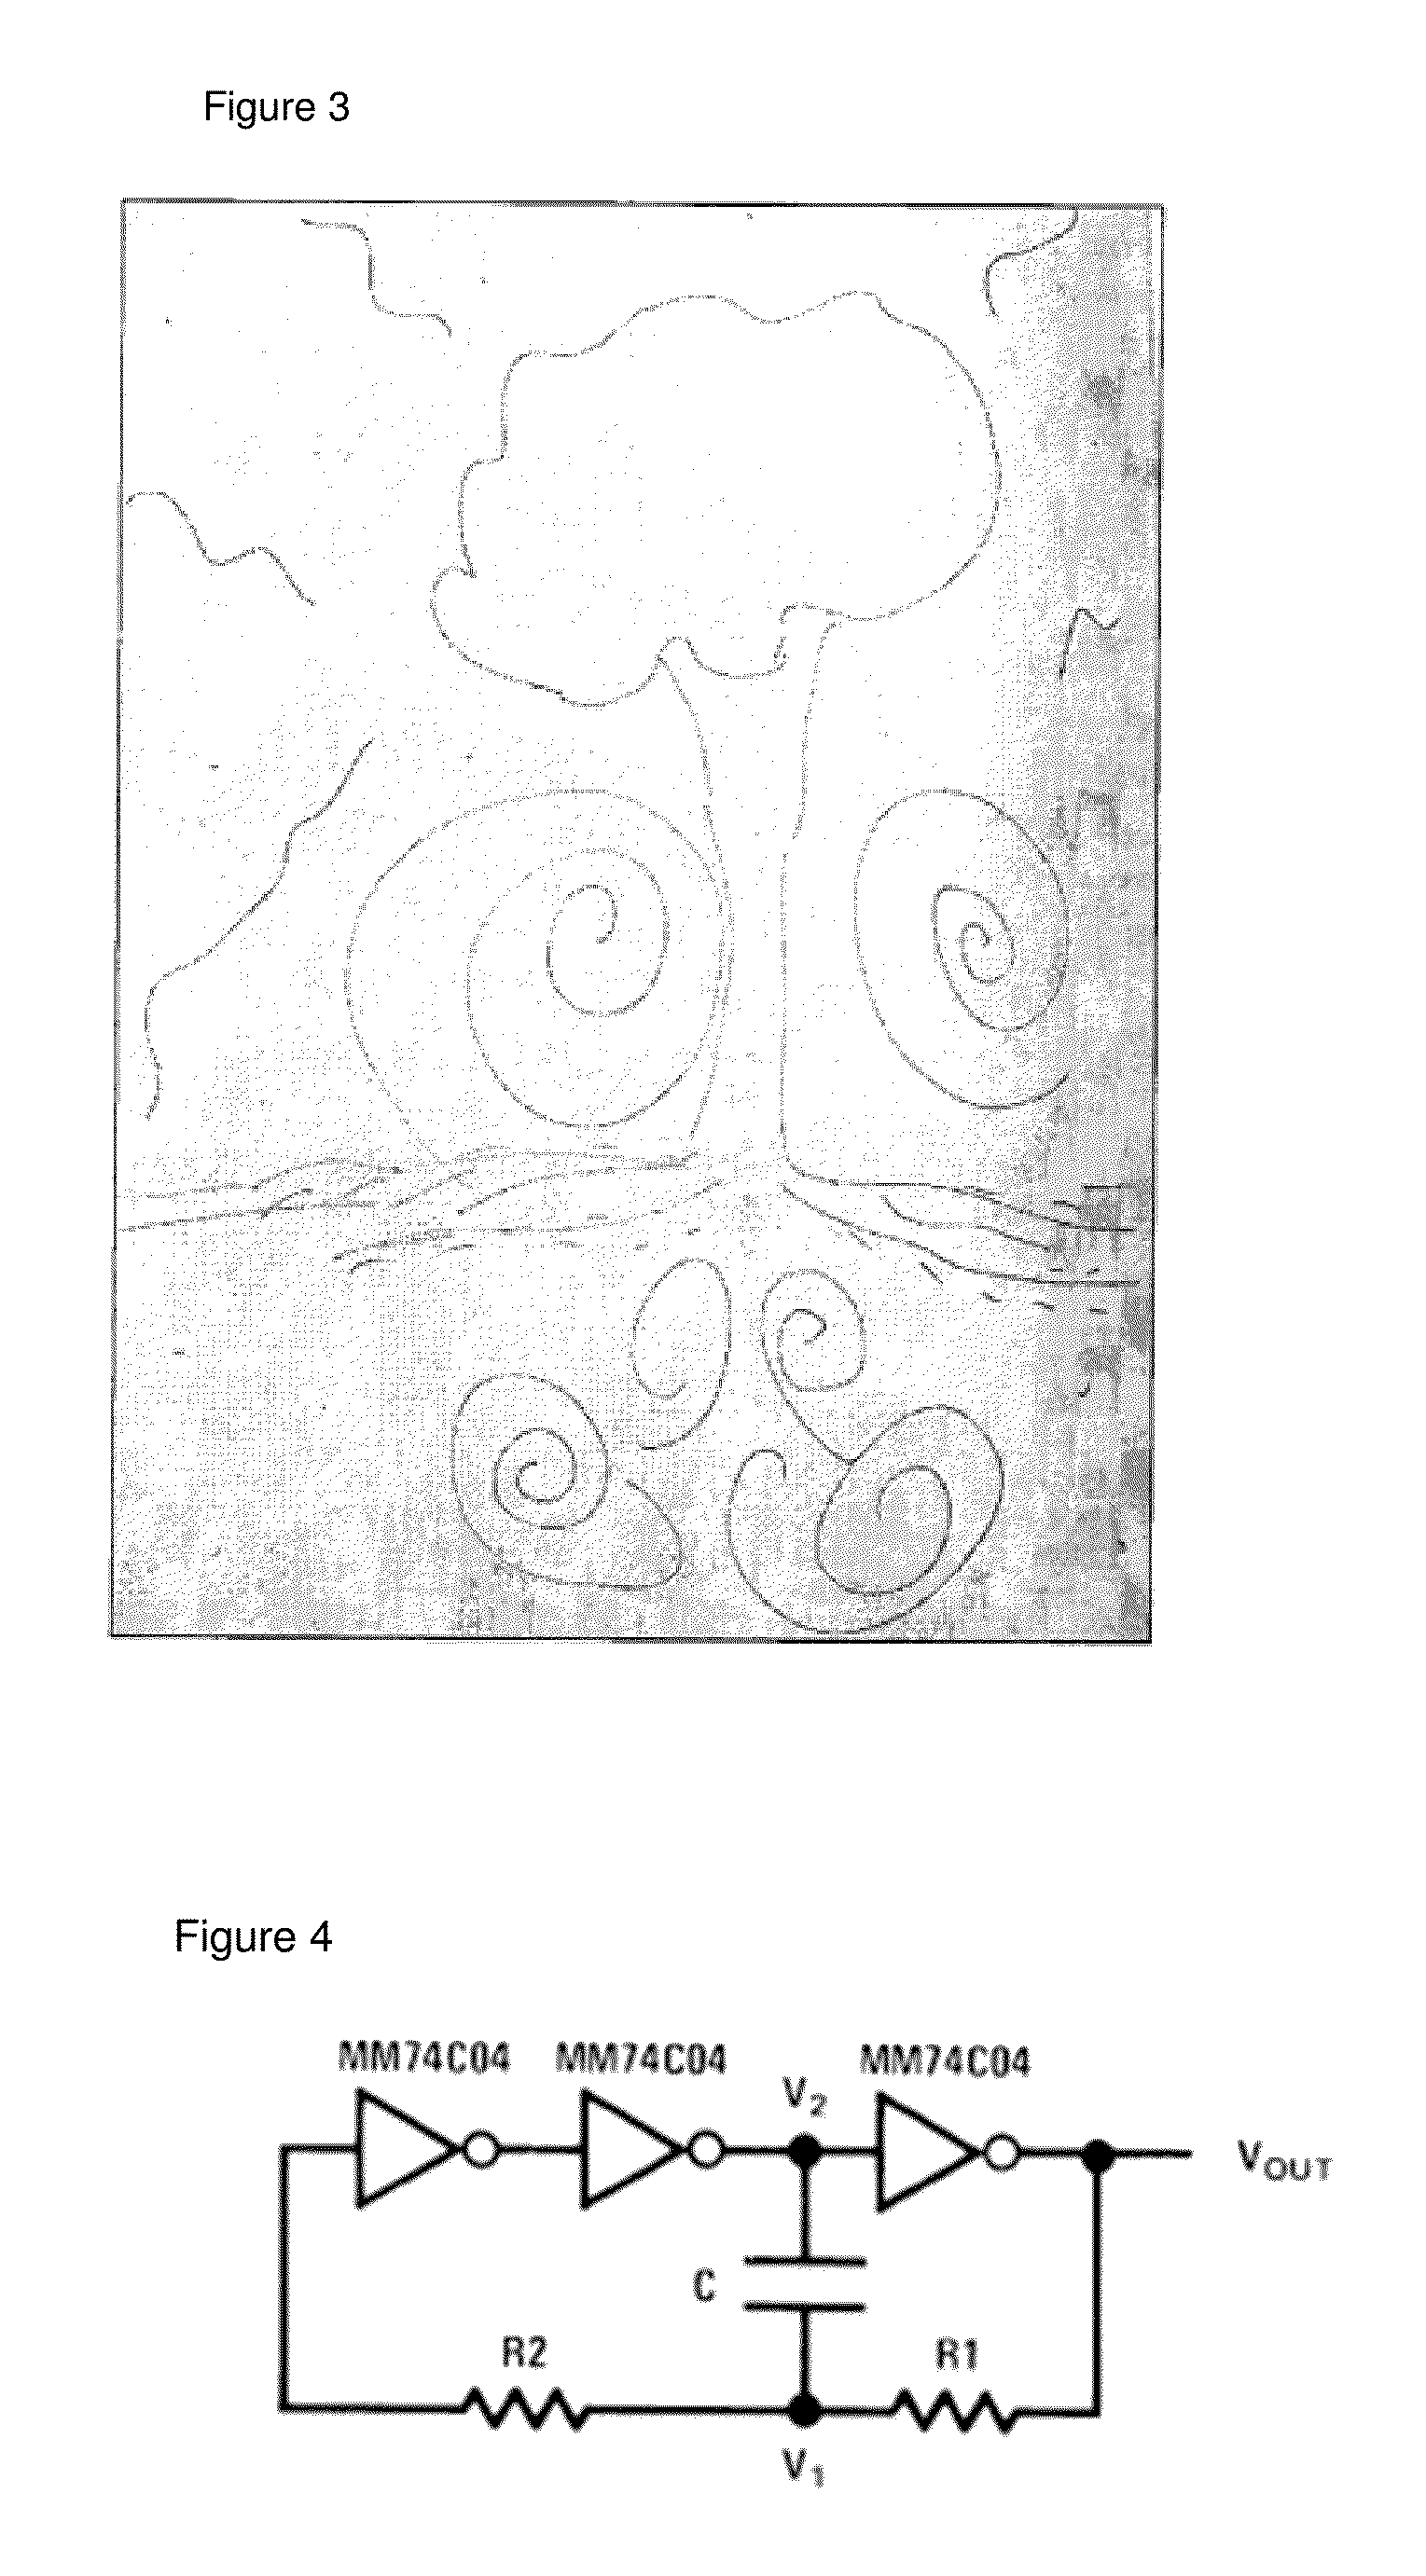 Signal capture method and apparatus for the detection of low frequency electric signals in liquids and biological matter